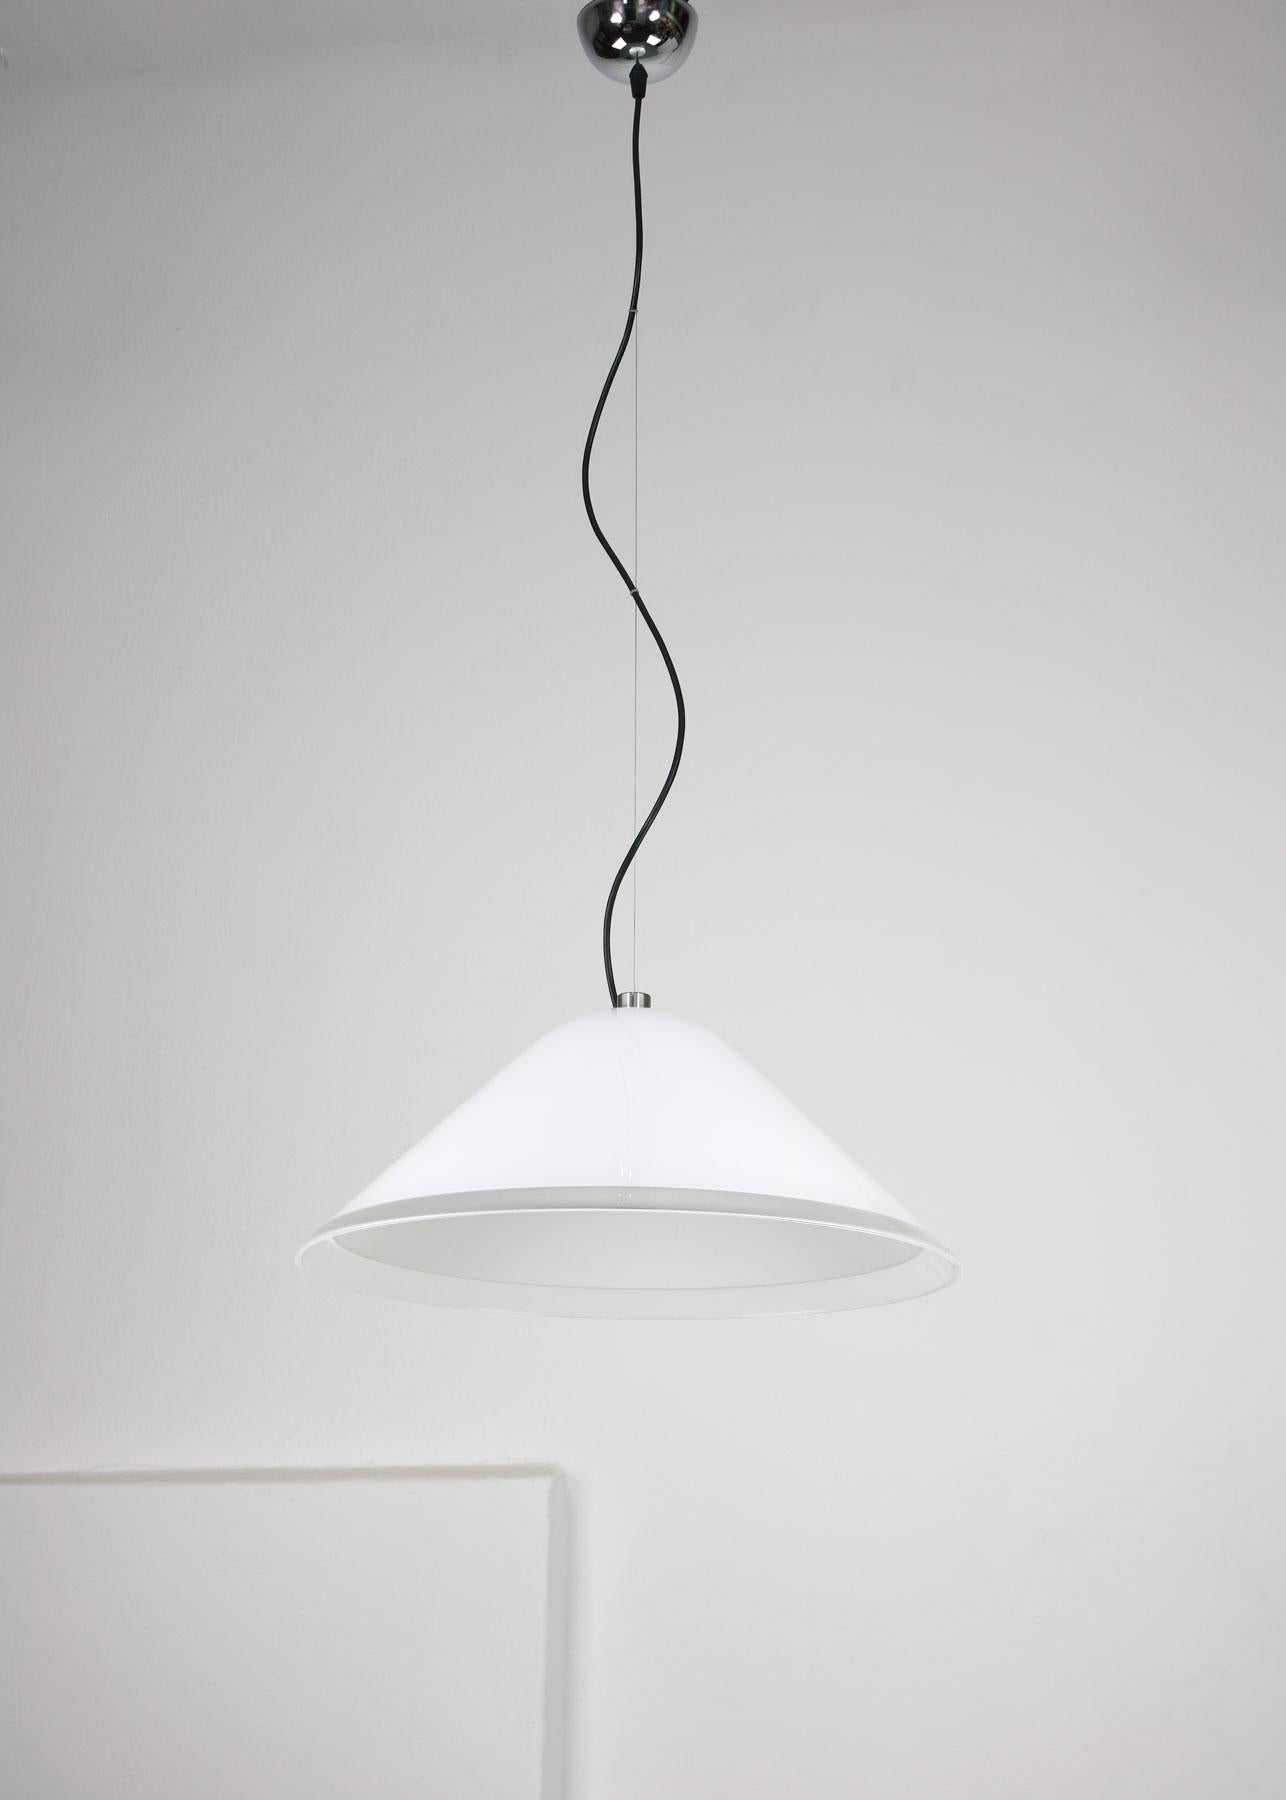 Mid-Century Modern Vintage Space Age Pendant Lamp from Guzzini & Meblo, 1970s For Sale